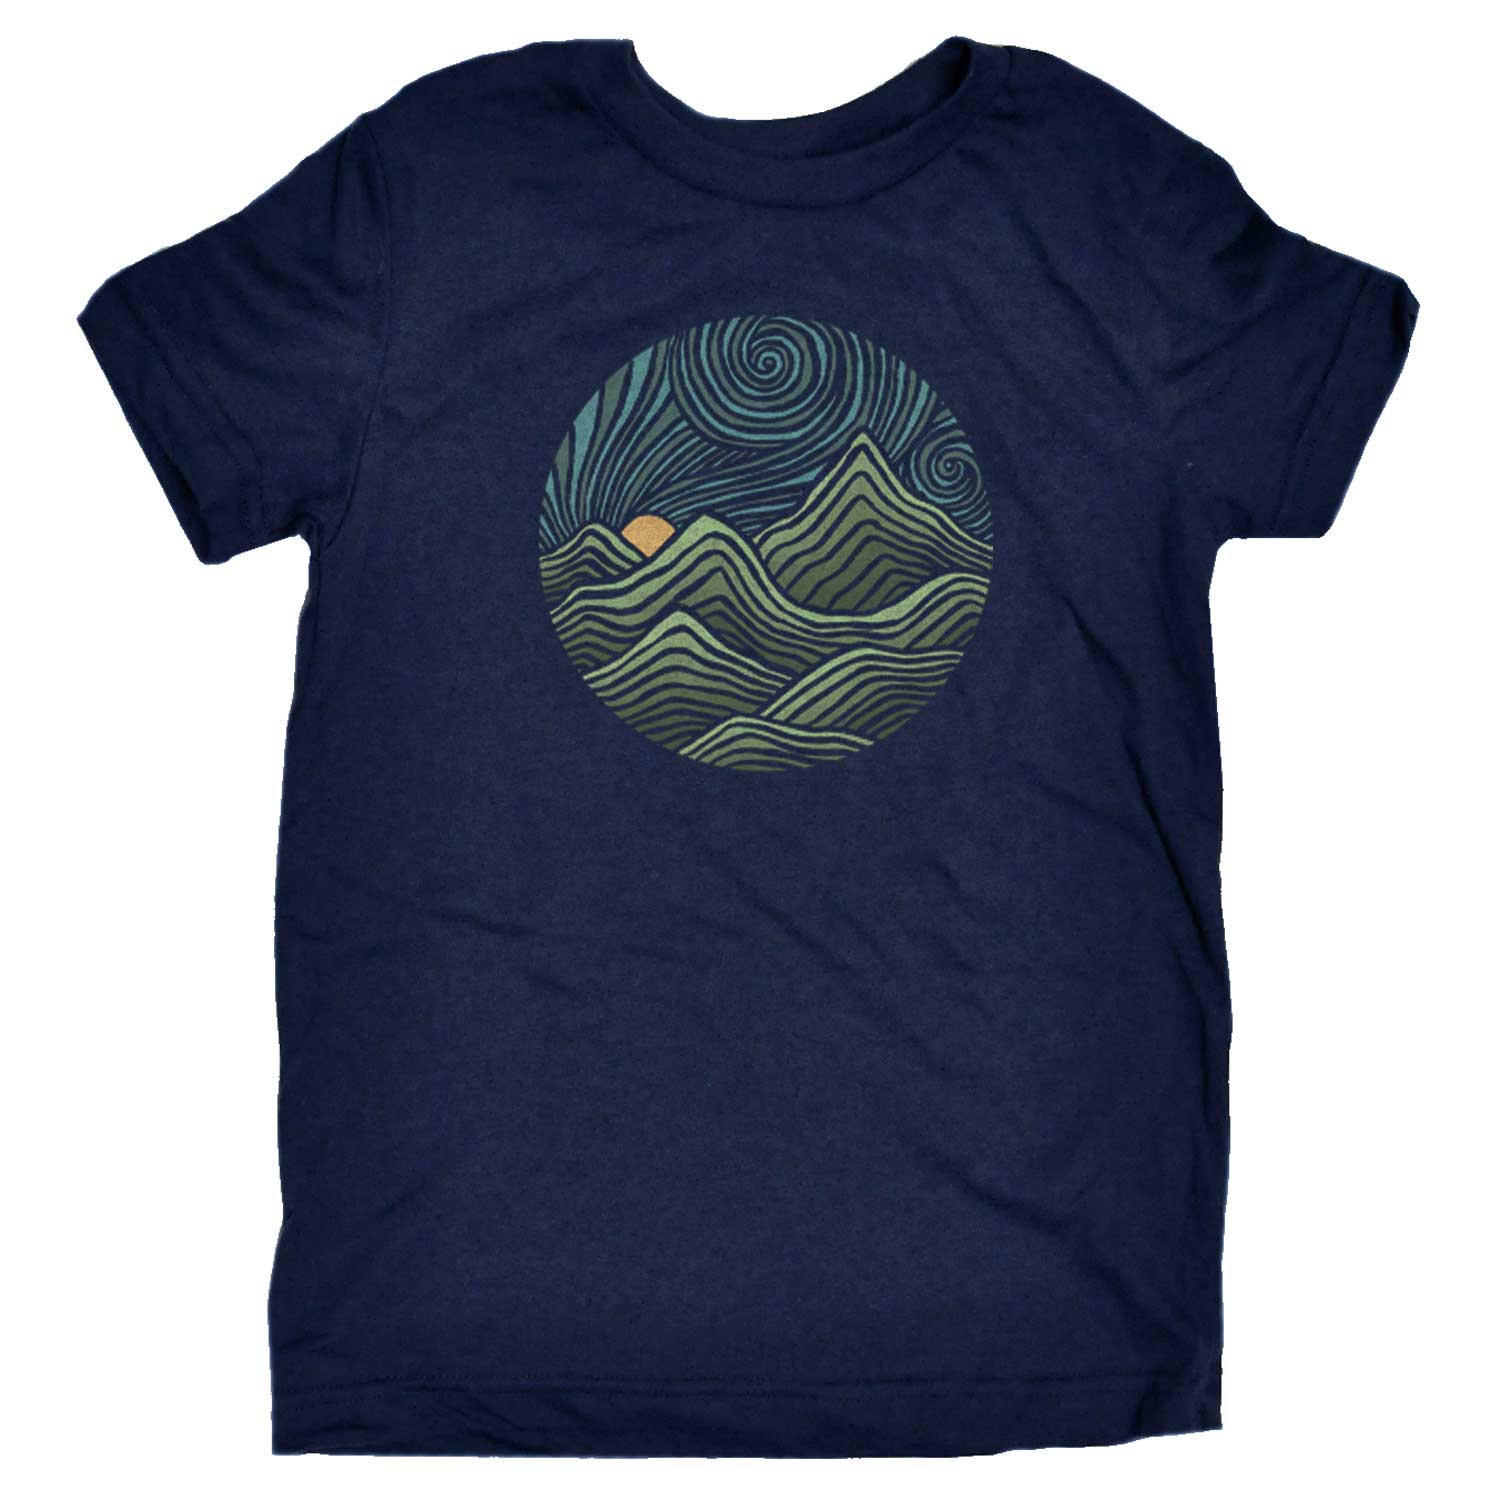 Kids Swirly Mountains Cool Nature Graphic T-Shirt | Retro Artsy Hippie Tee | Solid Threads